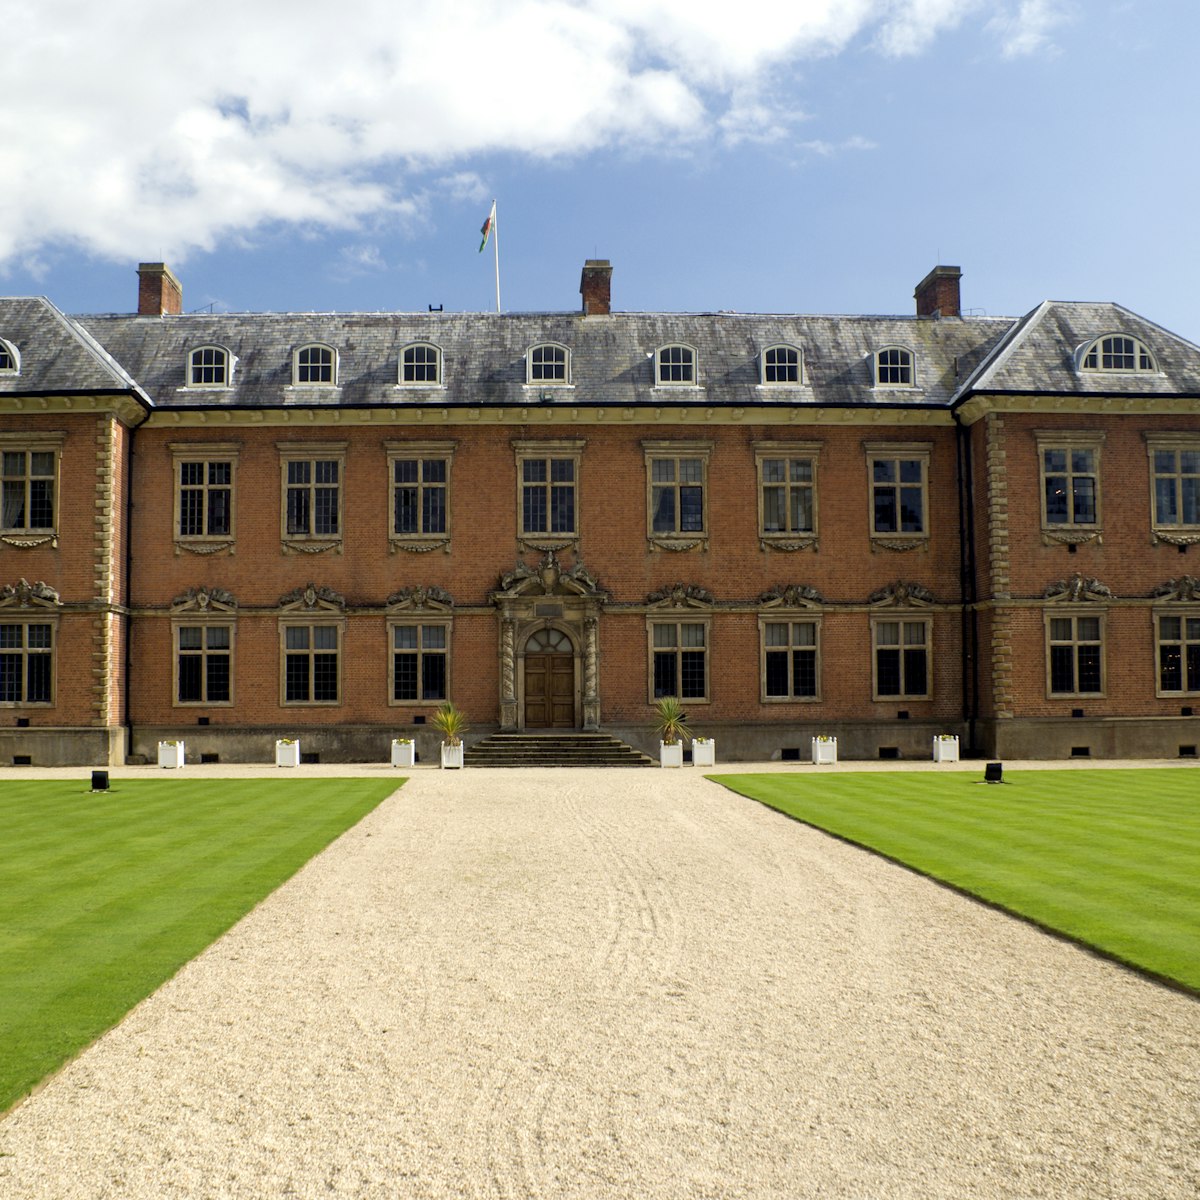 Tredegar House near Newport in Gwent. Popular tourist attraction and set in a beautiful 90 acre park, Tredegar House is one of the best examples of a 17th century Charles II mansion in Britain.